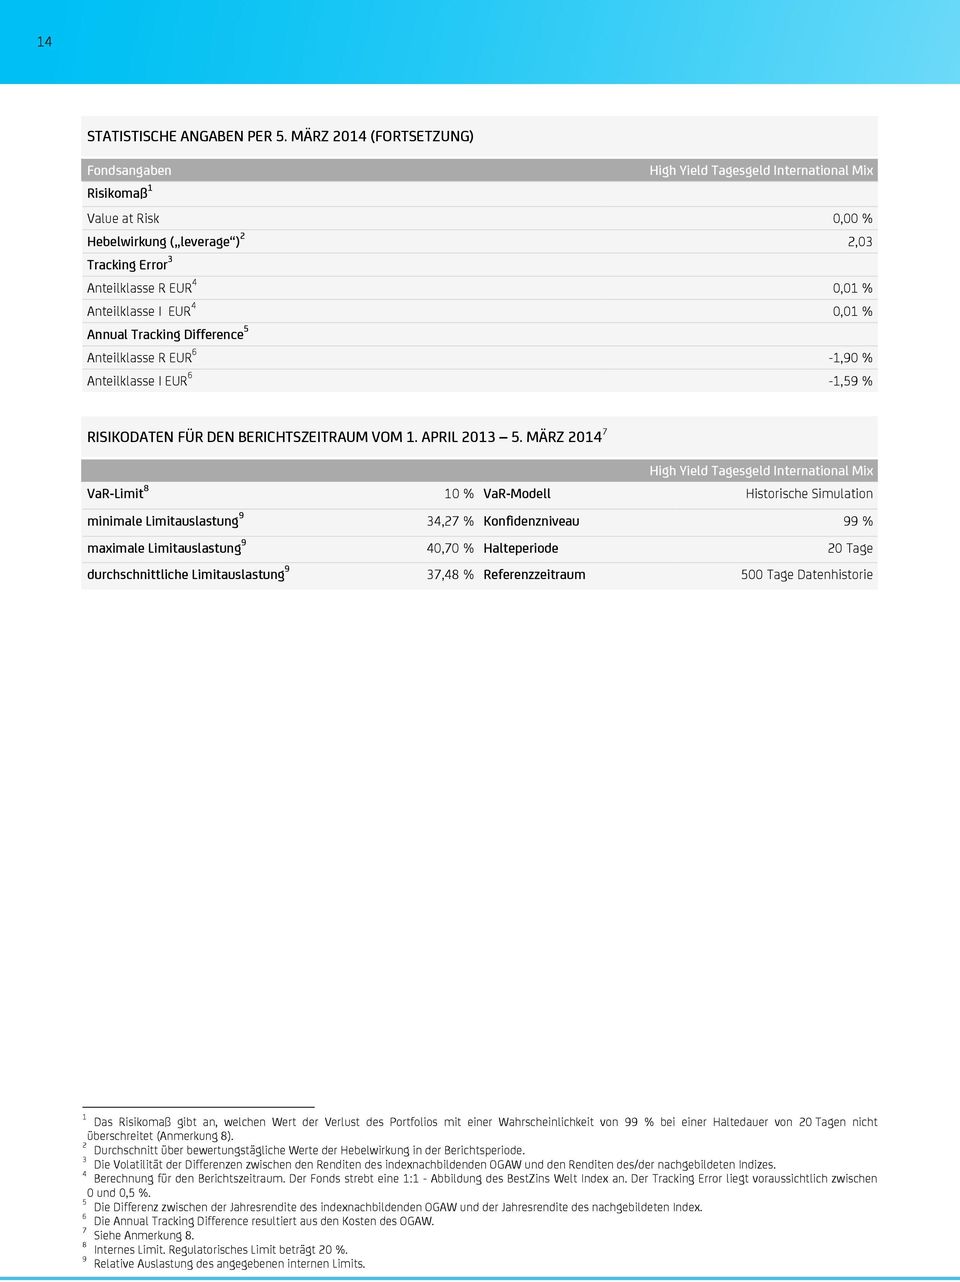 I EUR 4 0,01 % Annual Tracking Difference 5 Anteilklasse R EUR 6-1,90 % Anteilklasse I EUR 6-1,59 % RISIKODATEN FÜR DEN BERICHTSZEITRAUM VOM 1. APRIL 2013 5.